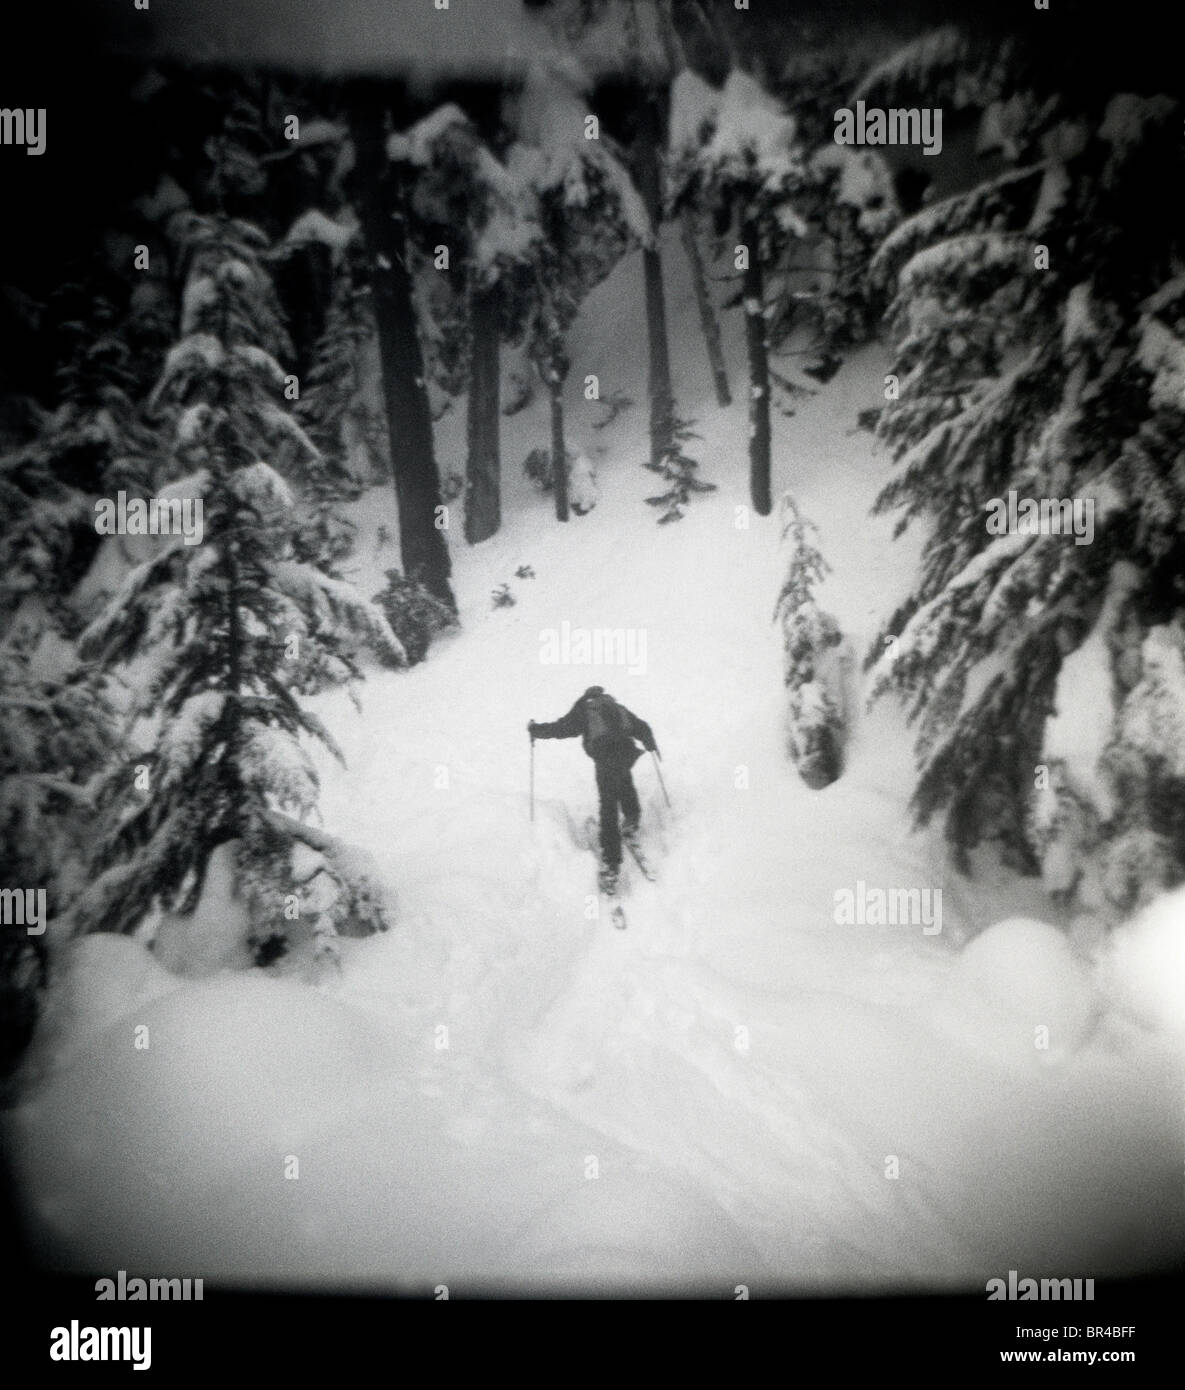 A skier skins up a trail at the Whistler Resort in British Columbia. Stock Photo